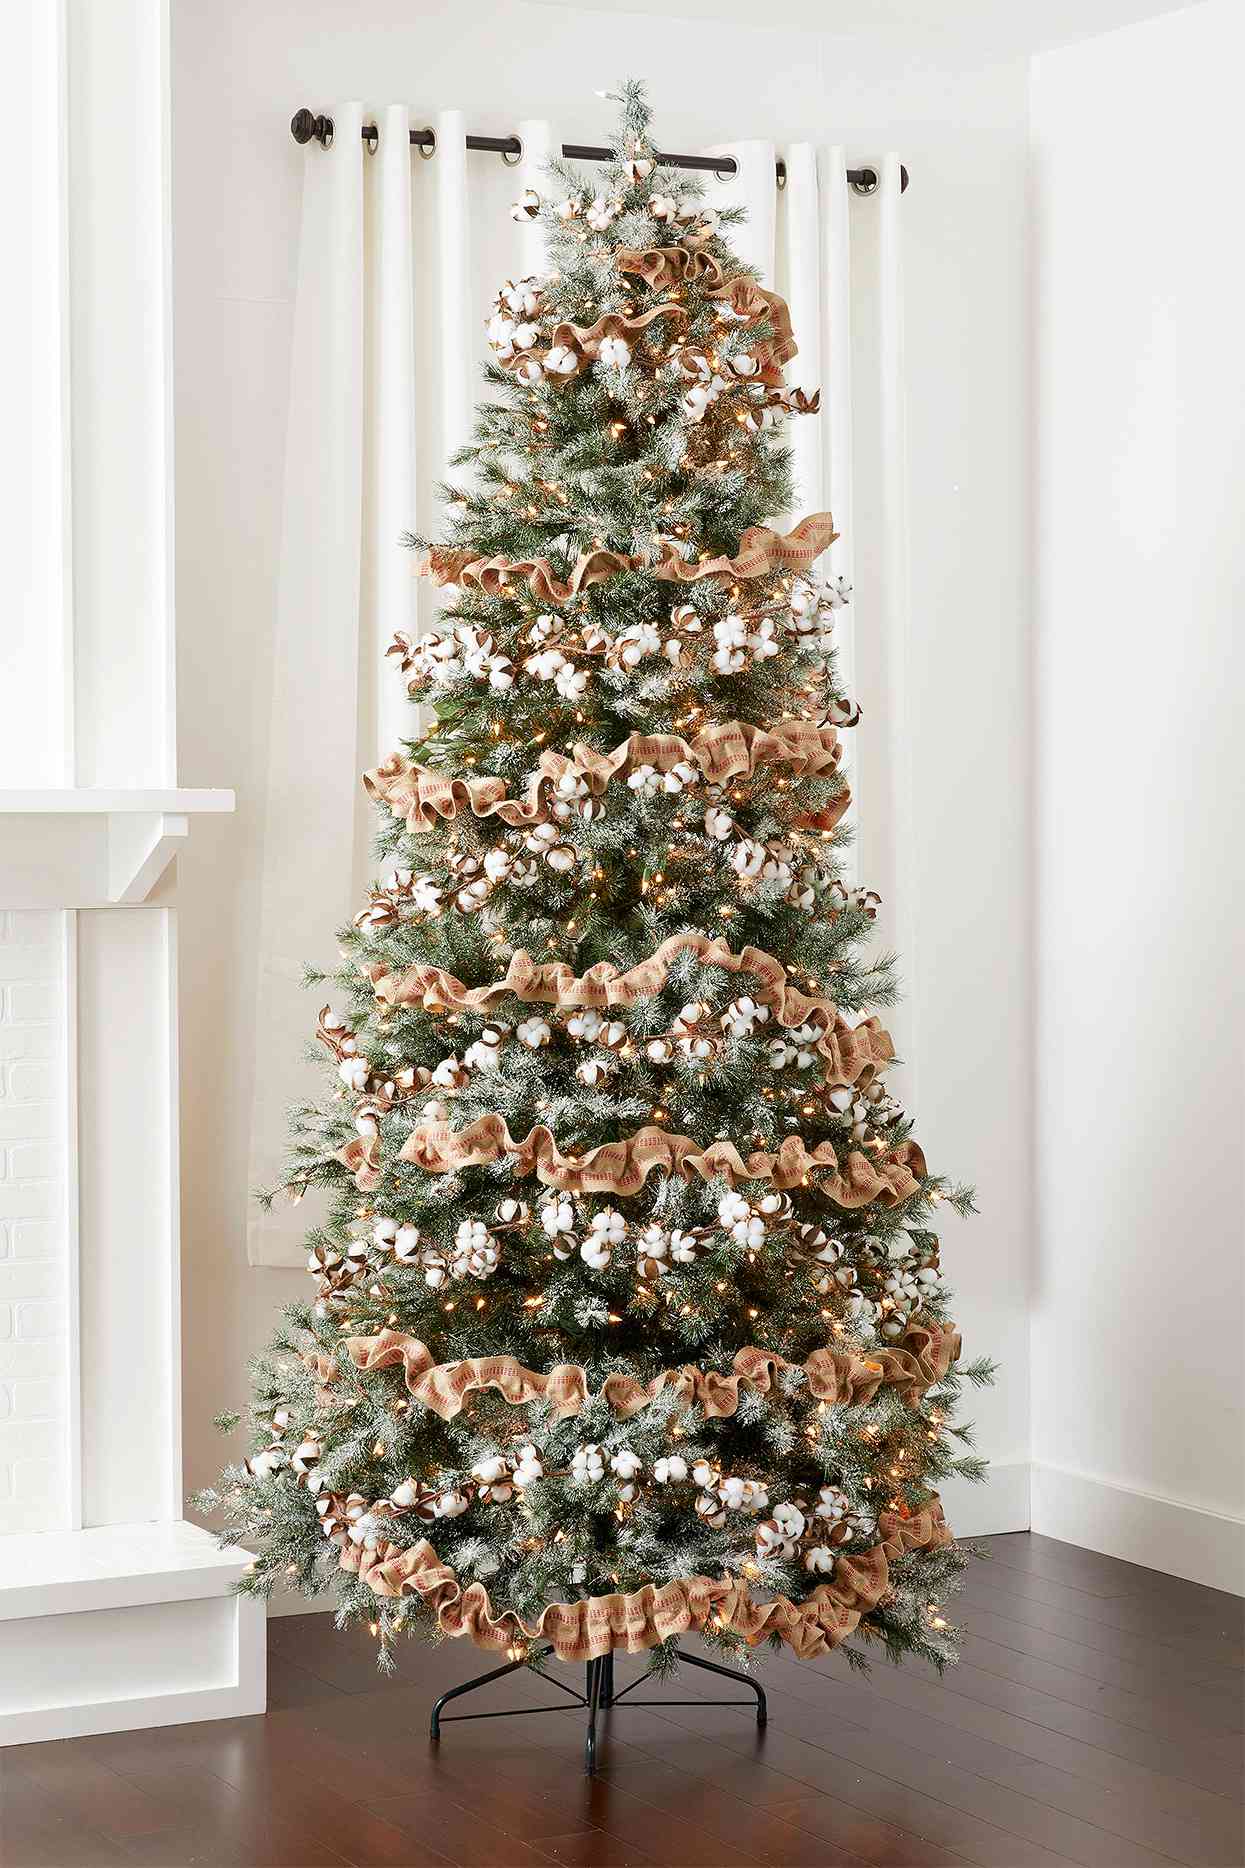 How to Decorate a Christmas Tree in 3 Easy Steps | Better Homes & Gardens